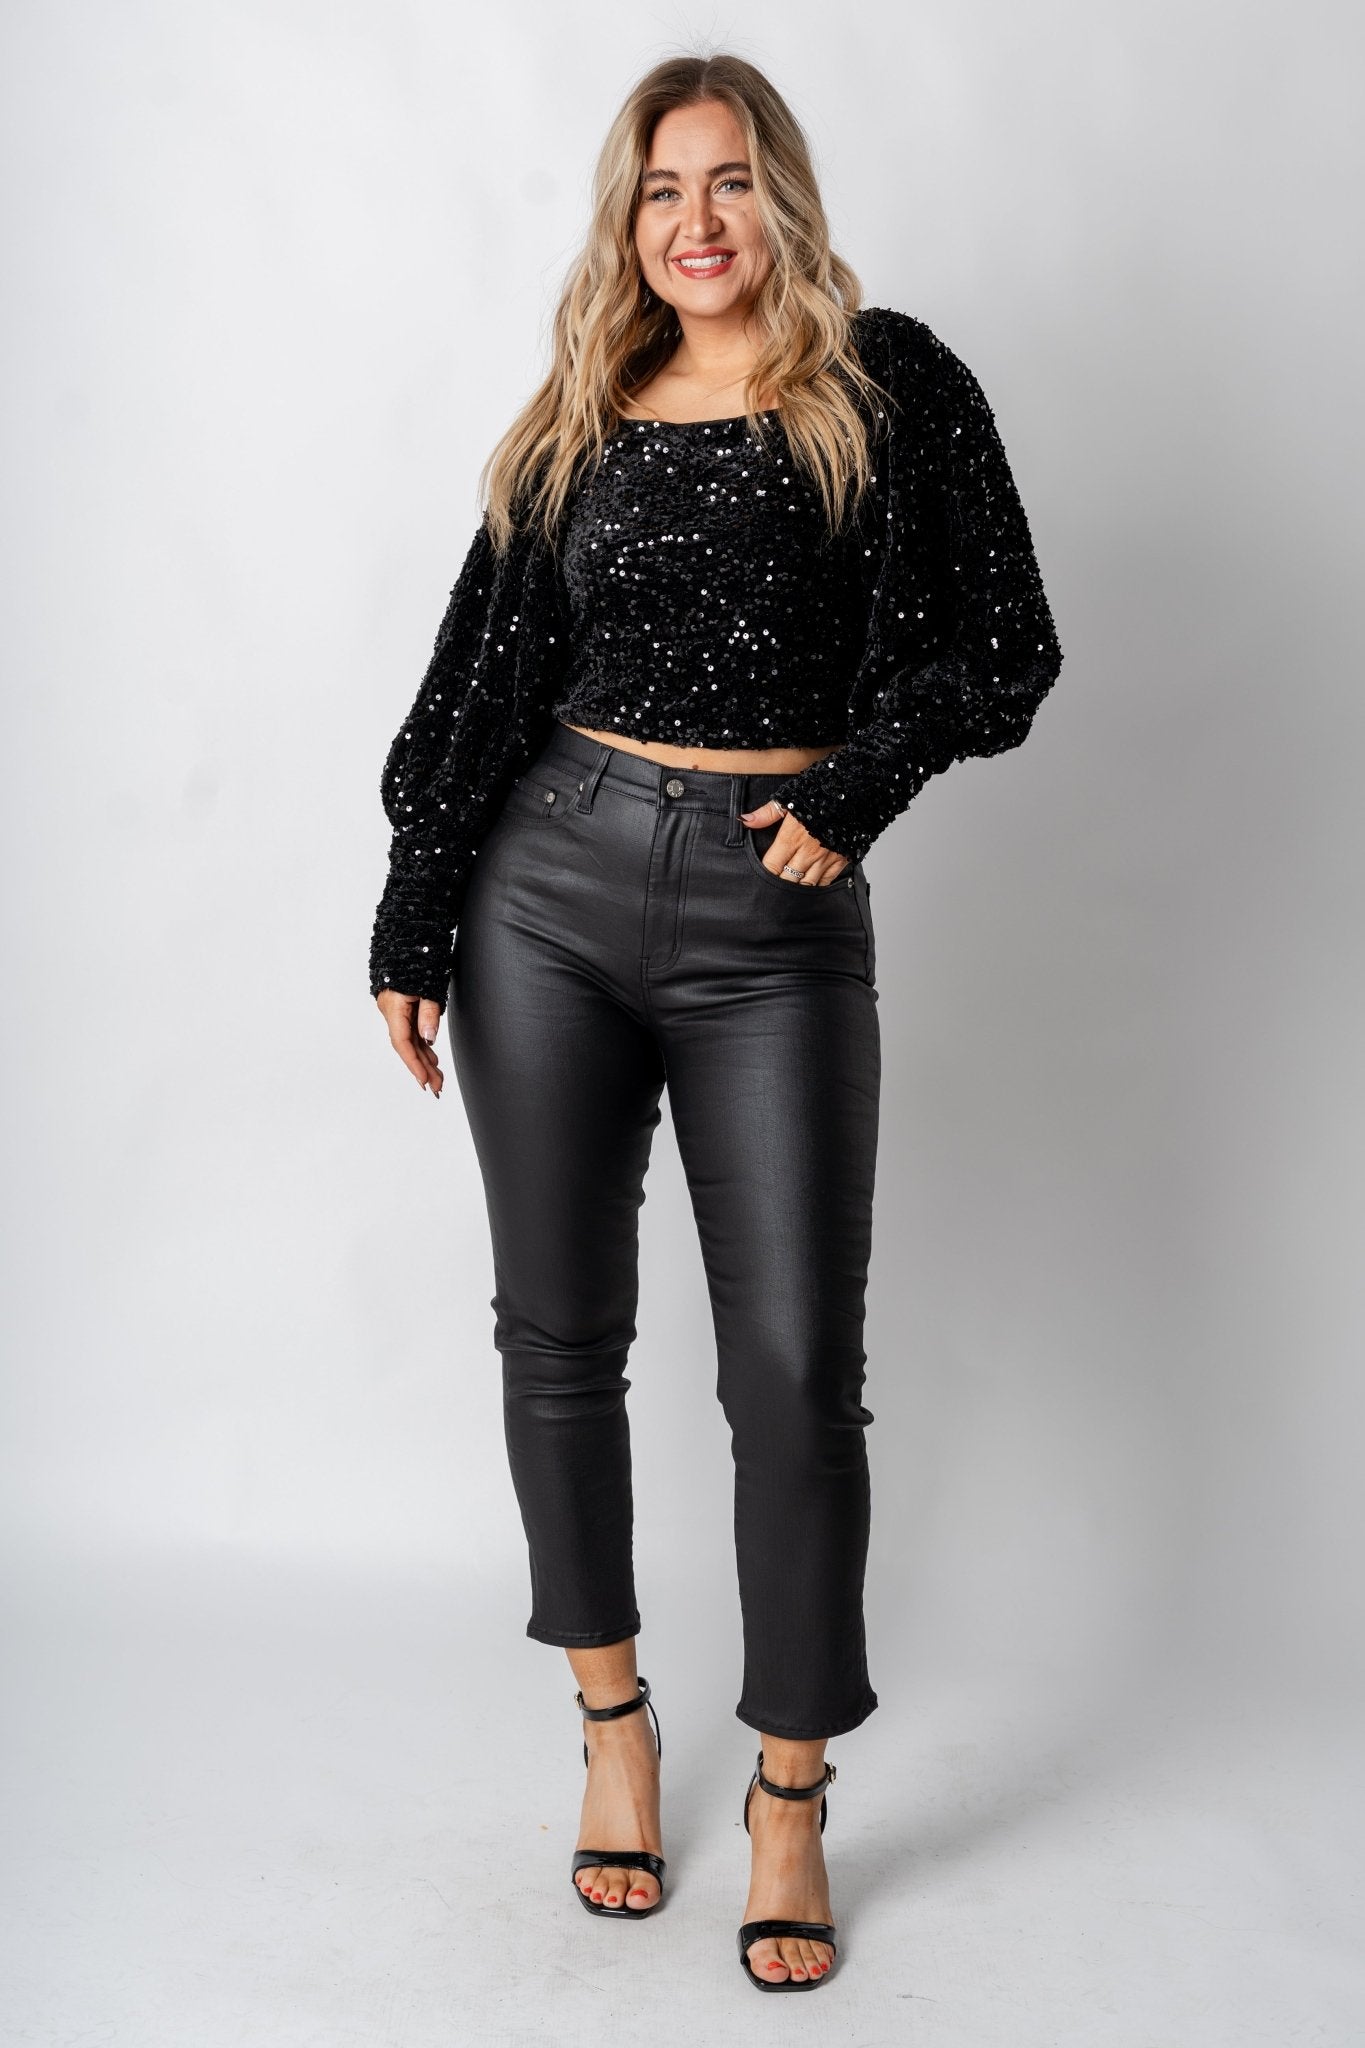 Daze daily drive high rise faux leather pants - Affordable New Year's Eve Party Outfits at Lush Fashion Lounge Boutique in Oklahoma City